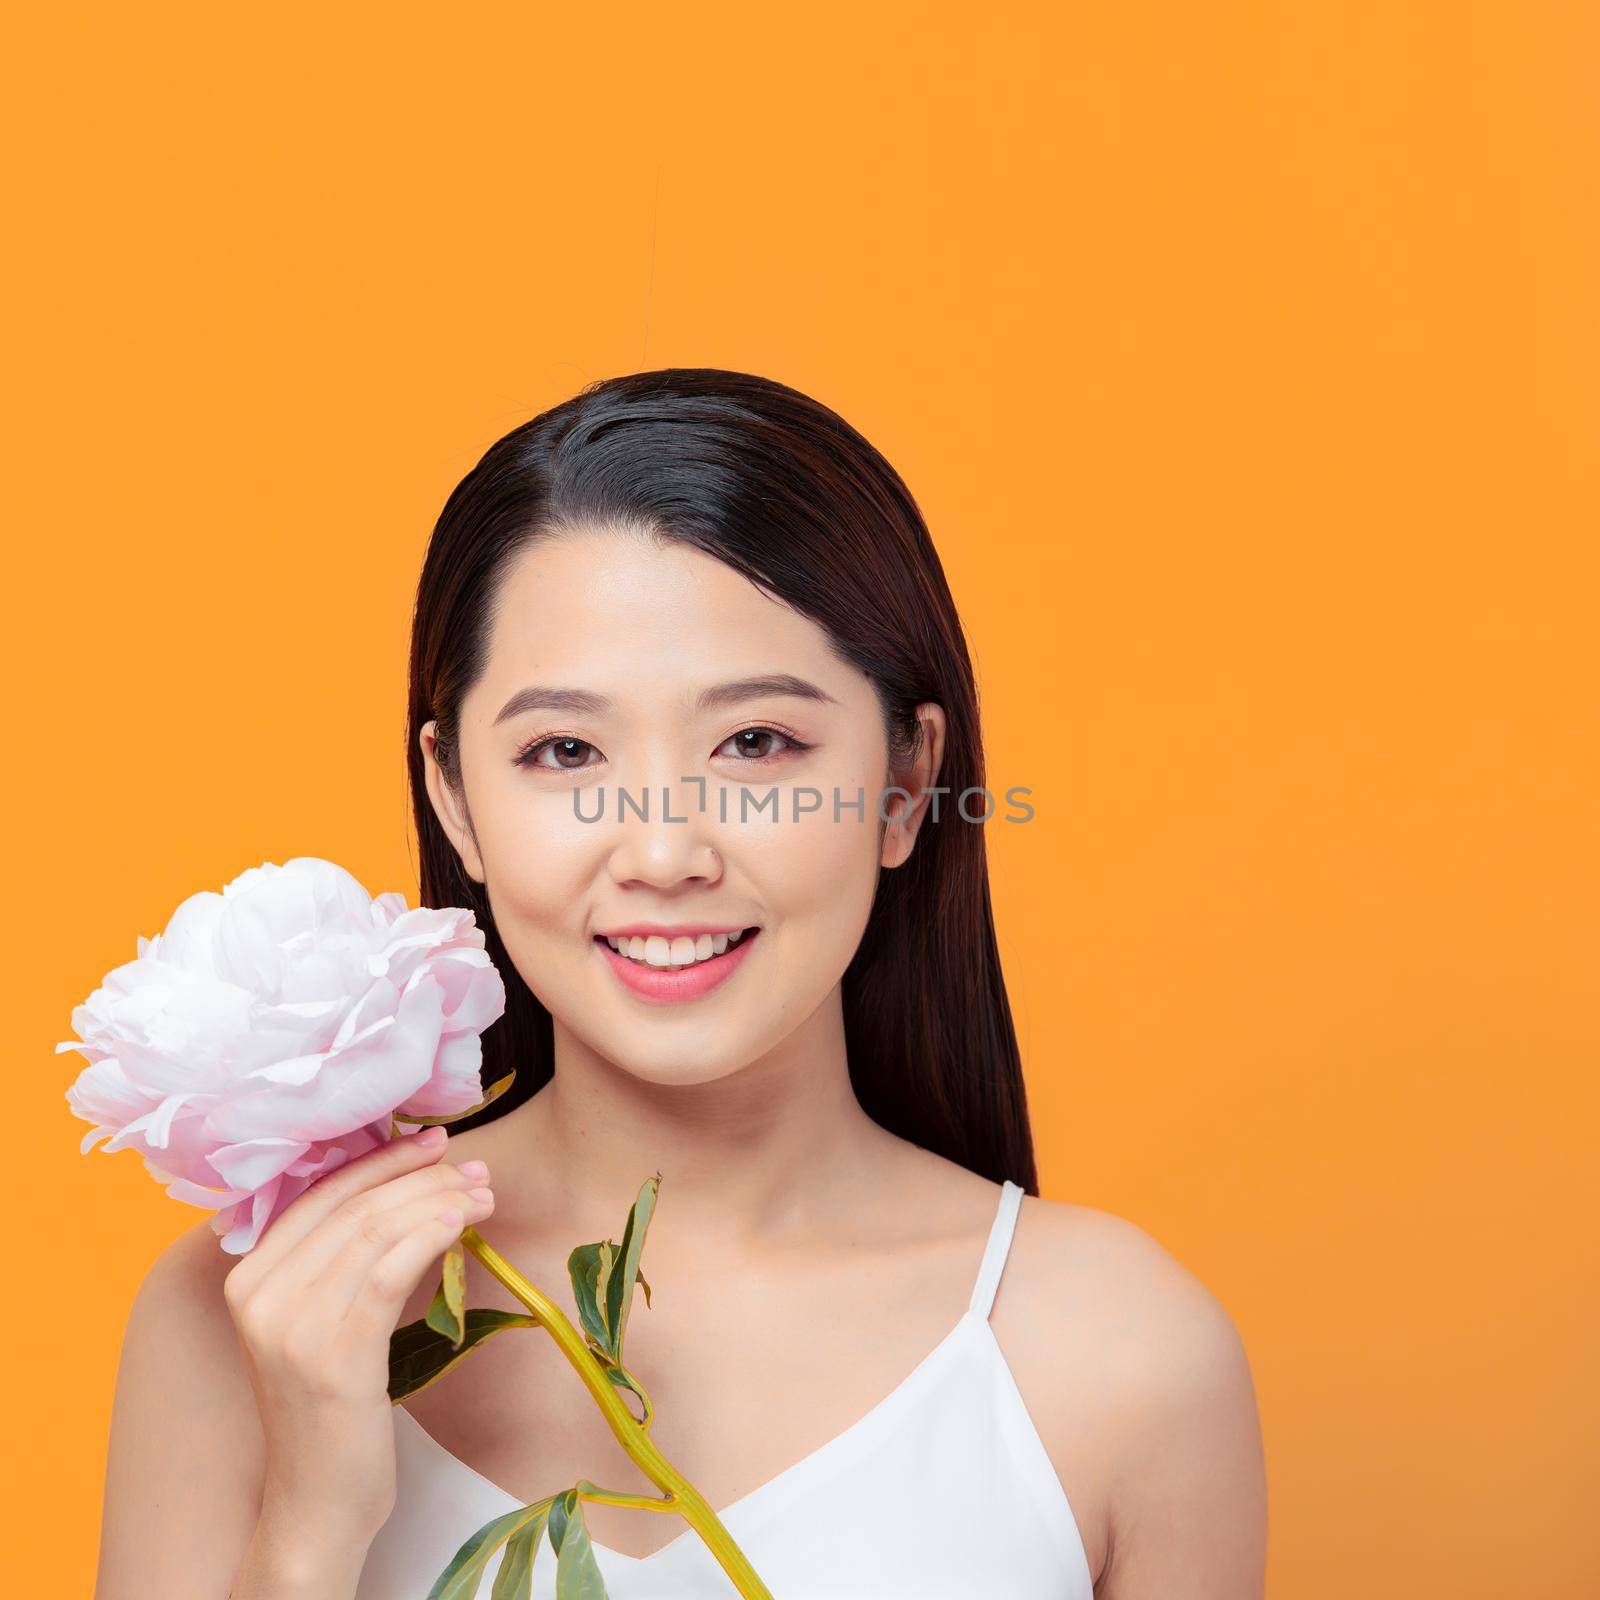 Young woman holding pink peony flower, smiling on yellow background